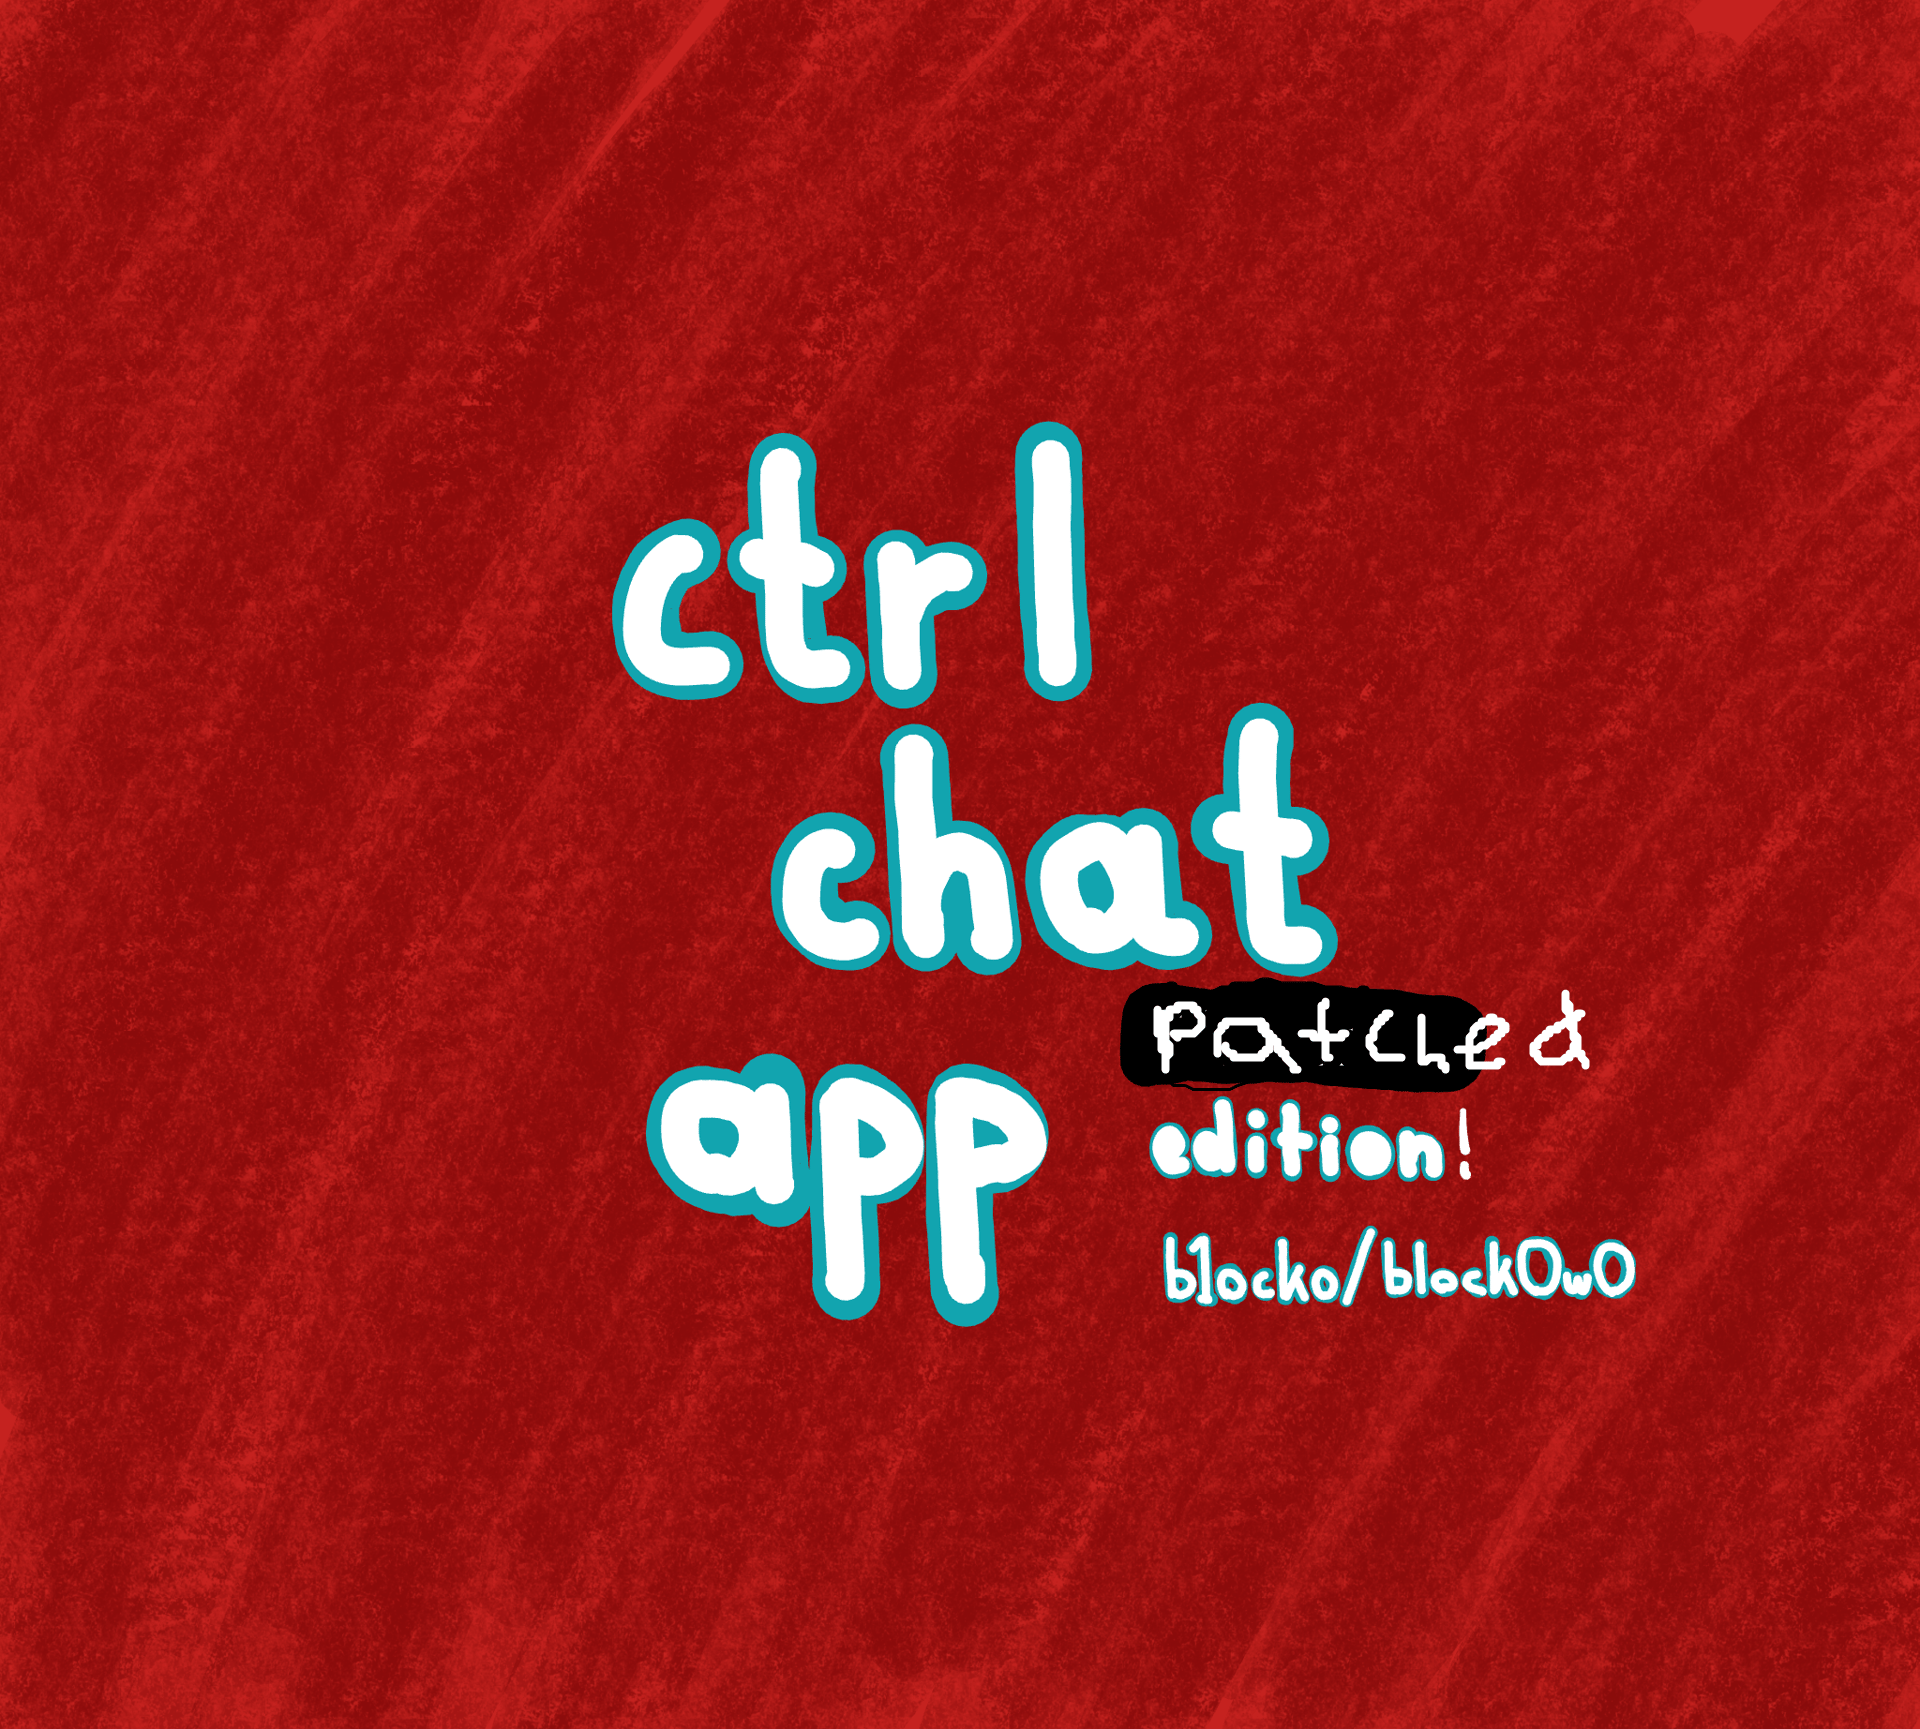 ctrl chat patched